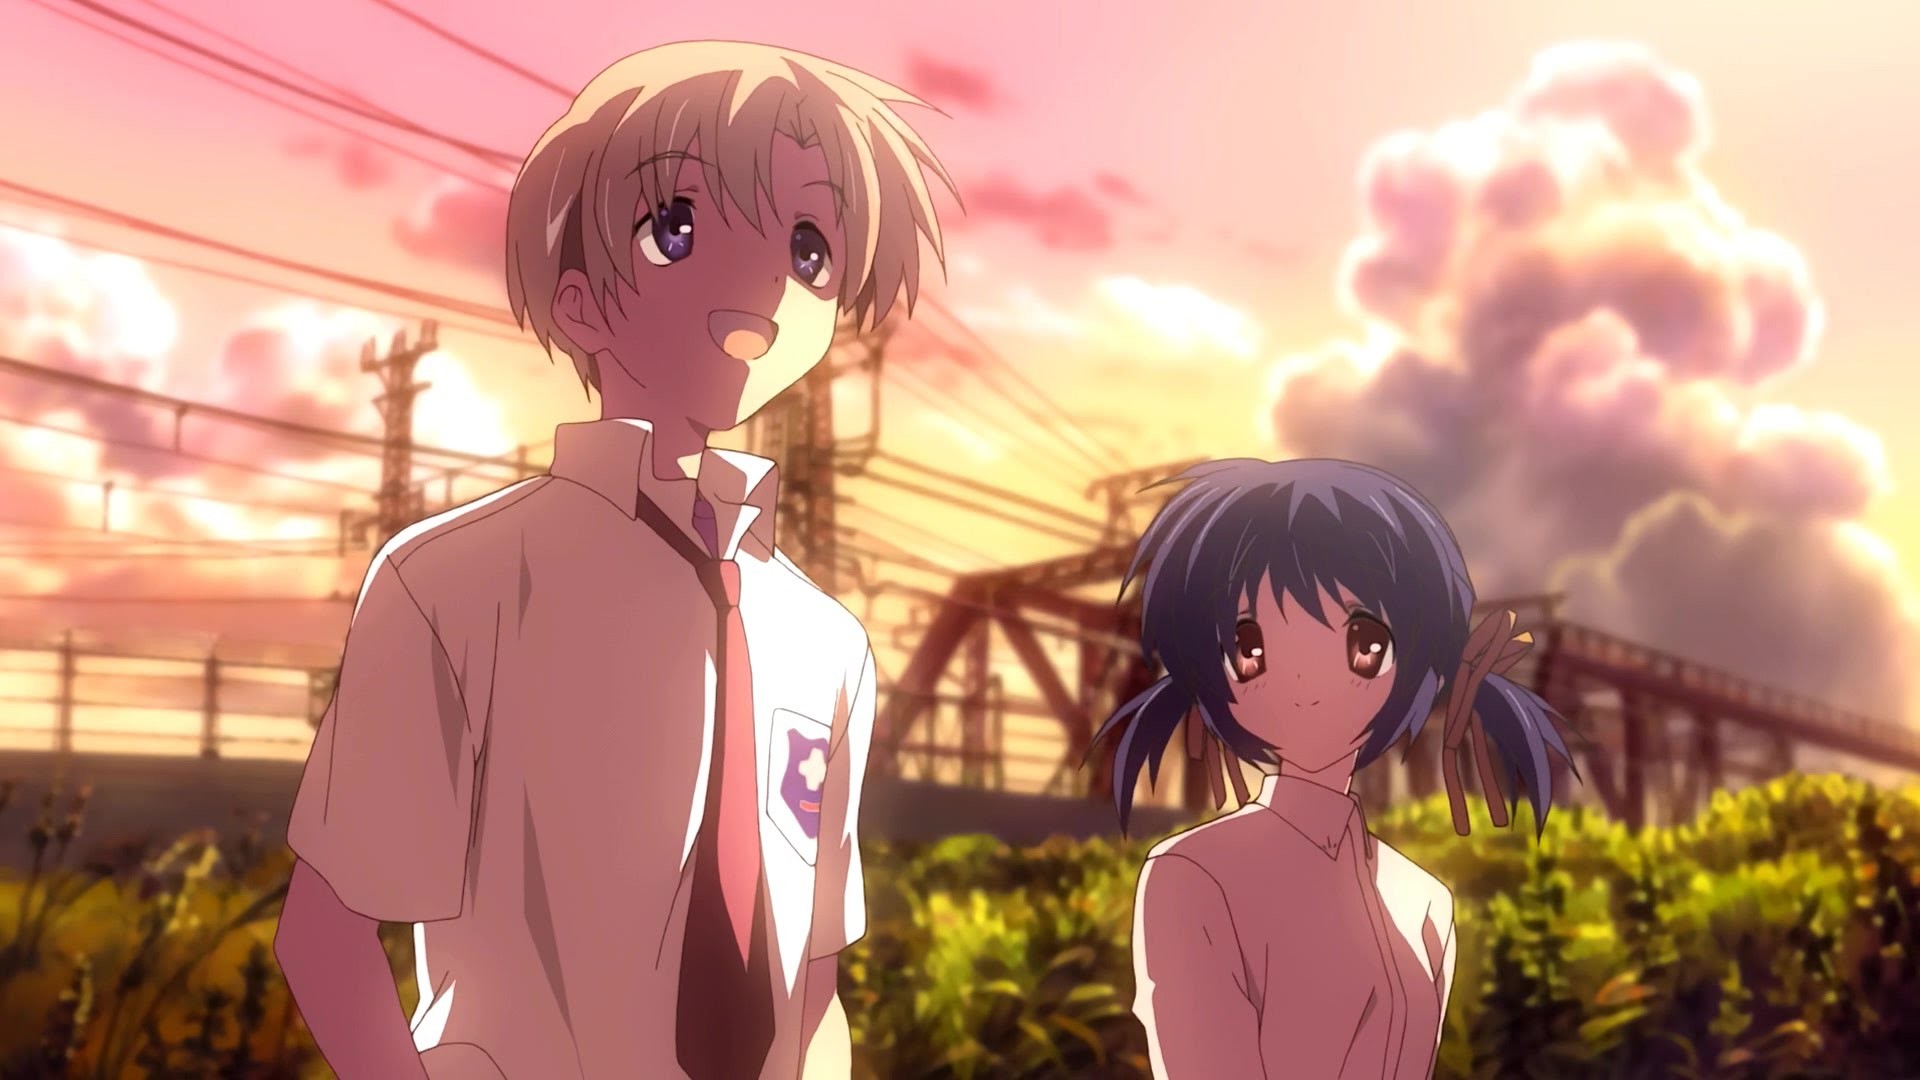 1920x1080 [Full HD/1080p] Clannad ~After Story~ Creditless OP